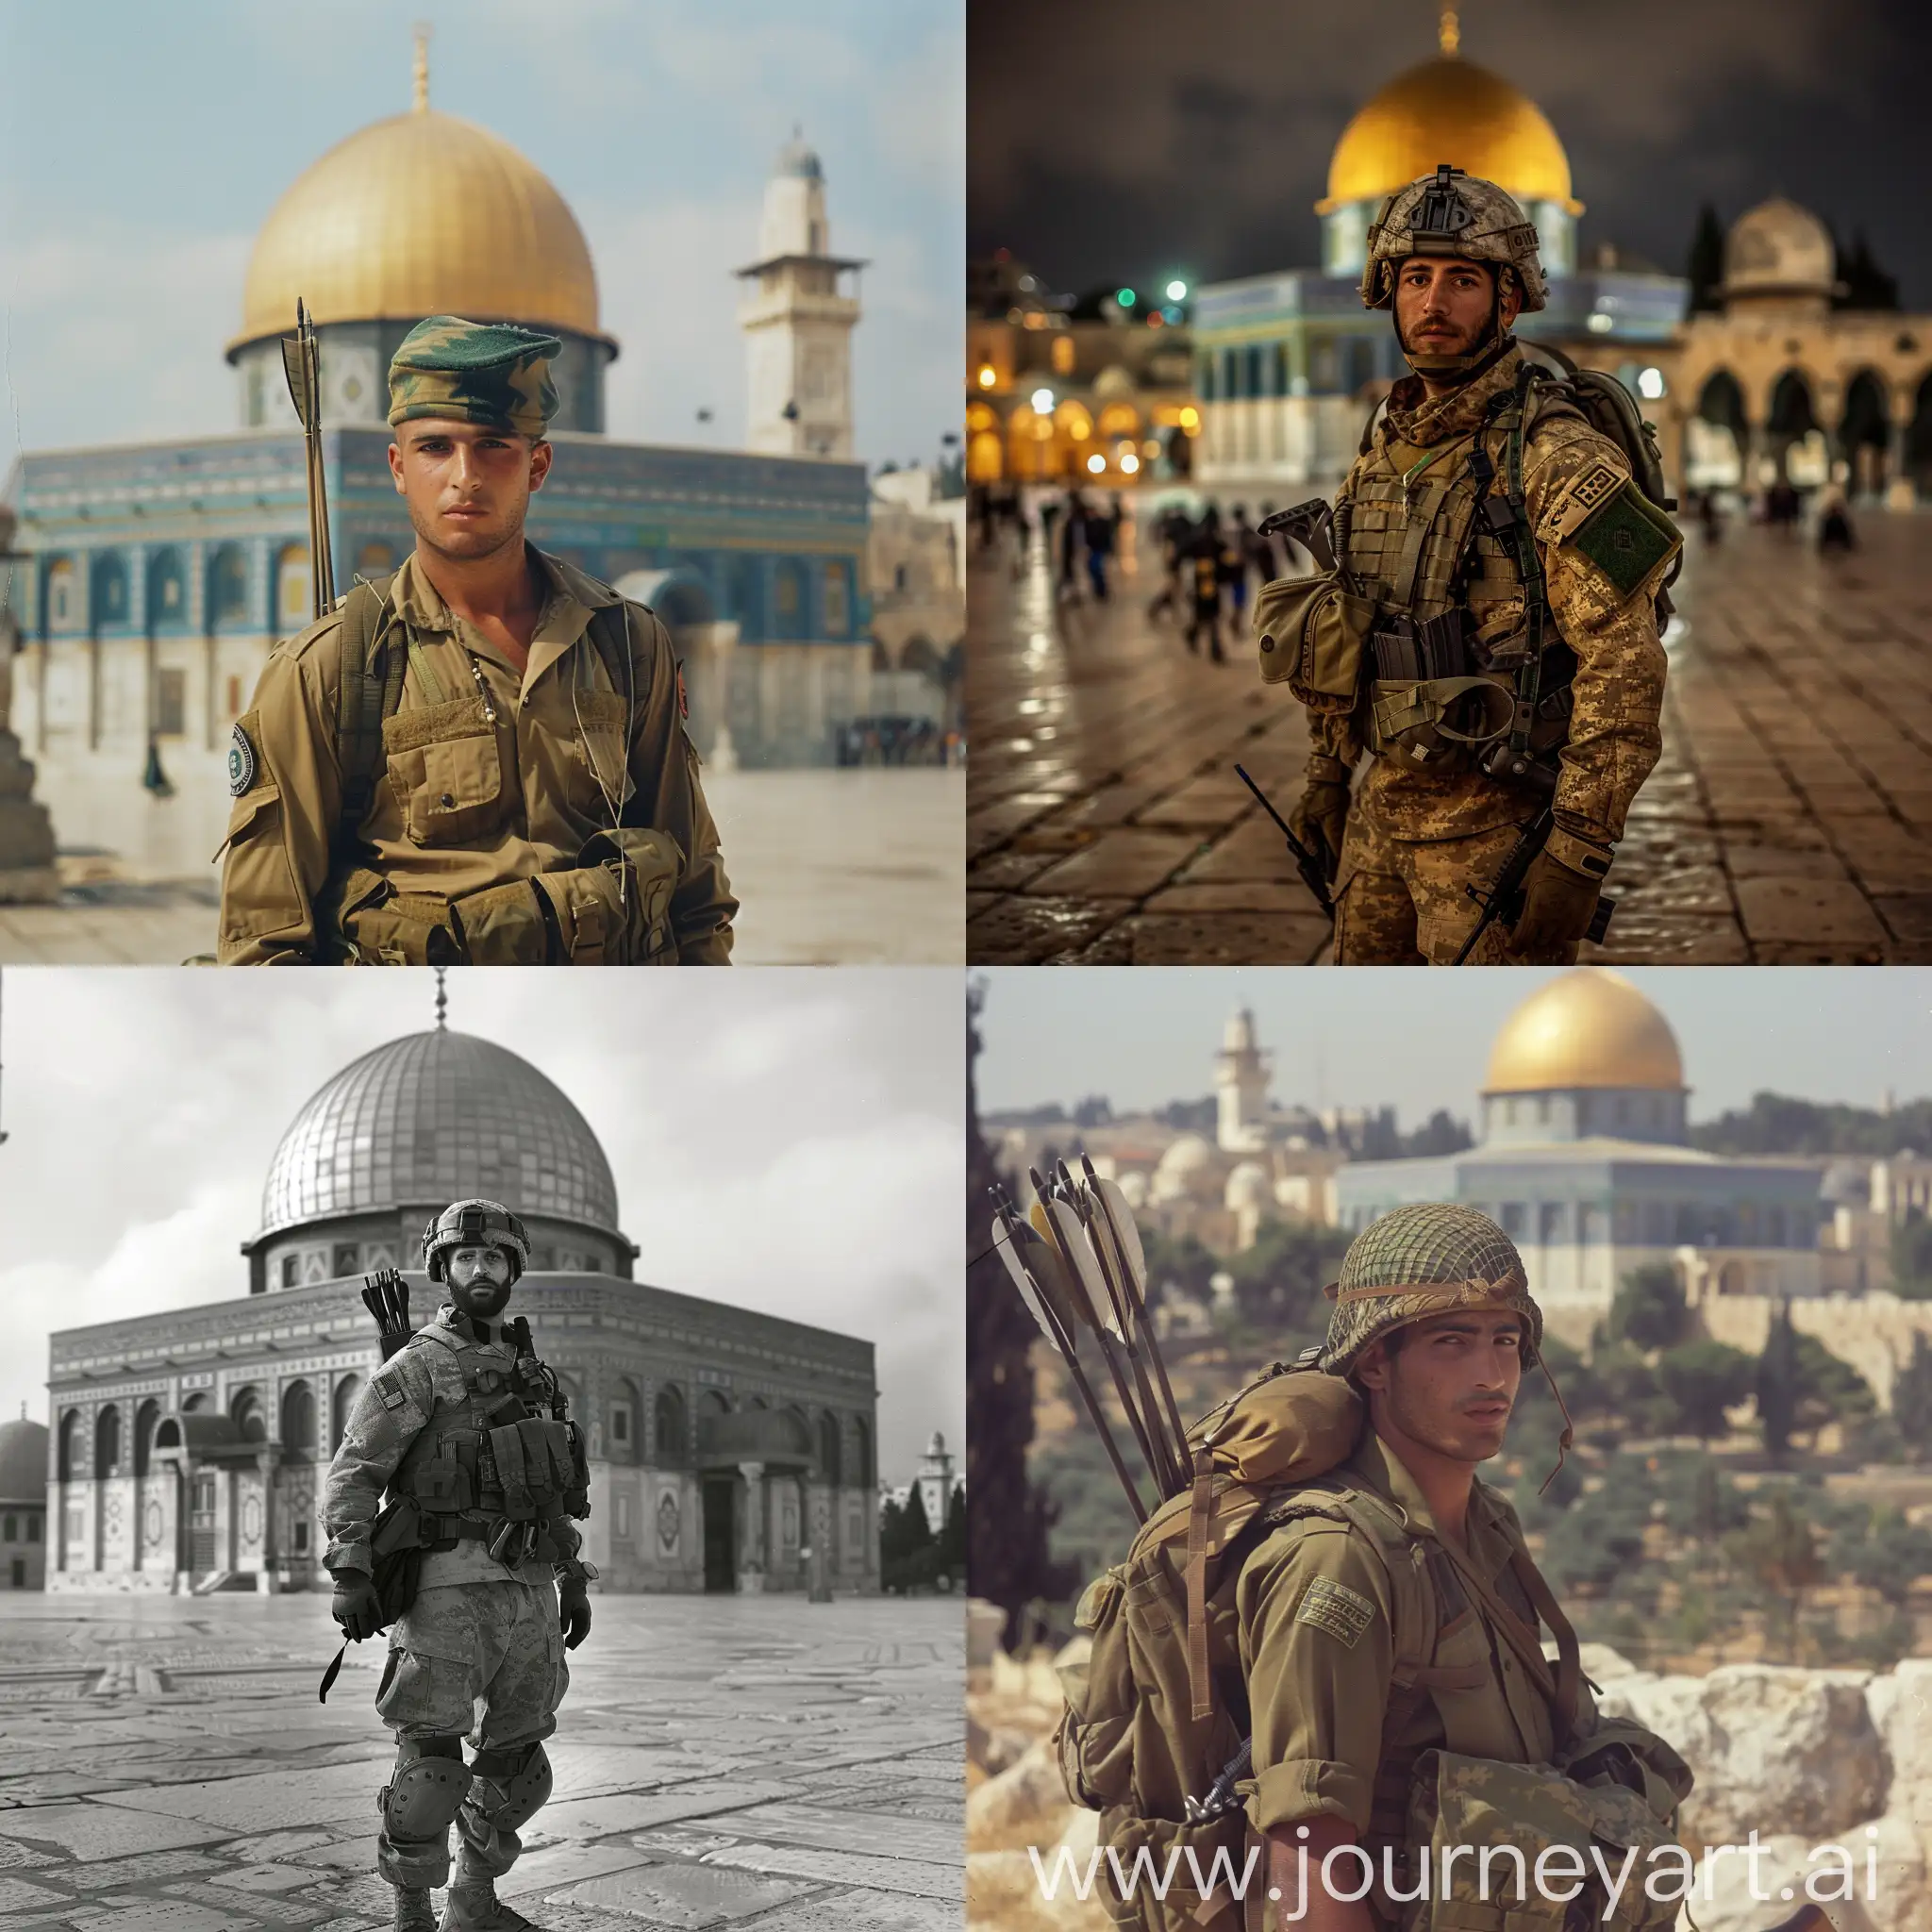 A soldier wearing a military uniform and quiver, standing in the middle, with the Dome of the Rock Mosque behind him in Palestine.